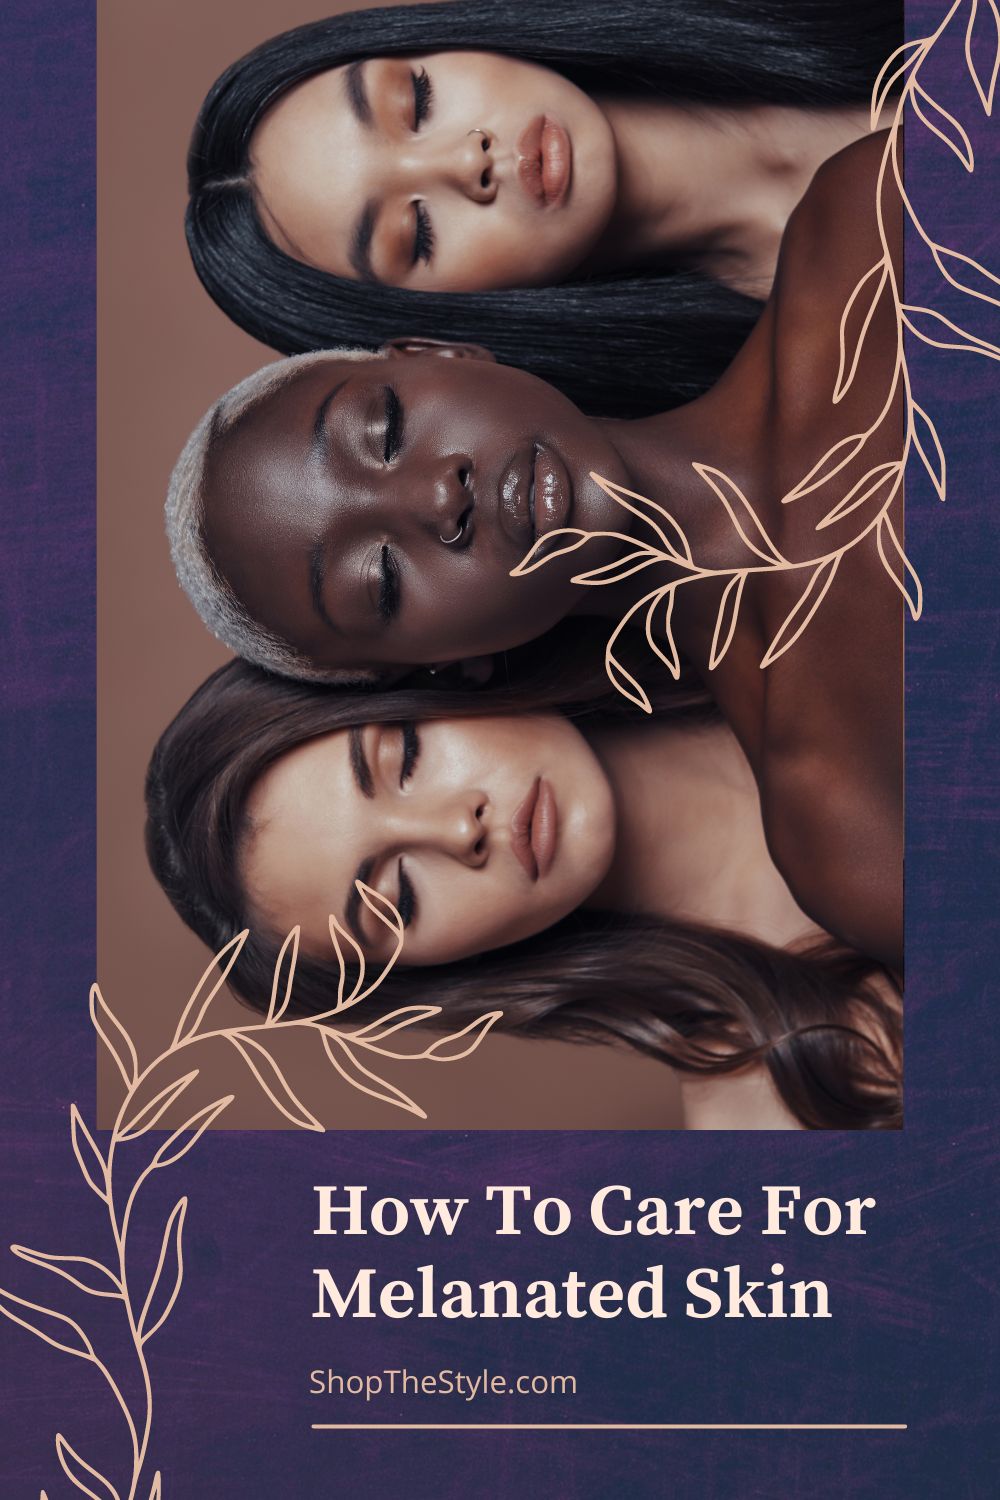 How To Care For Melanated Skin